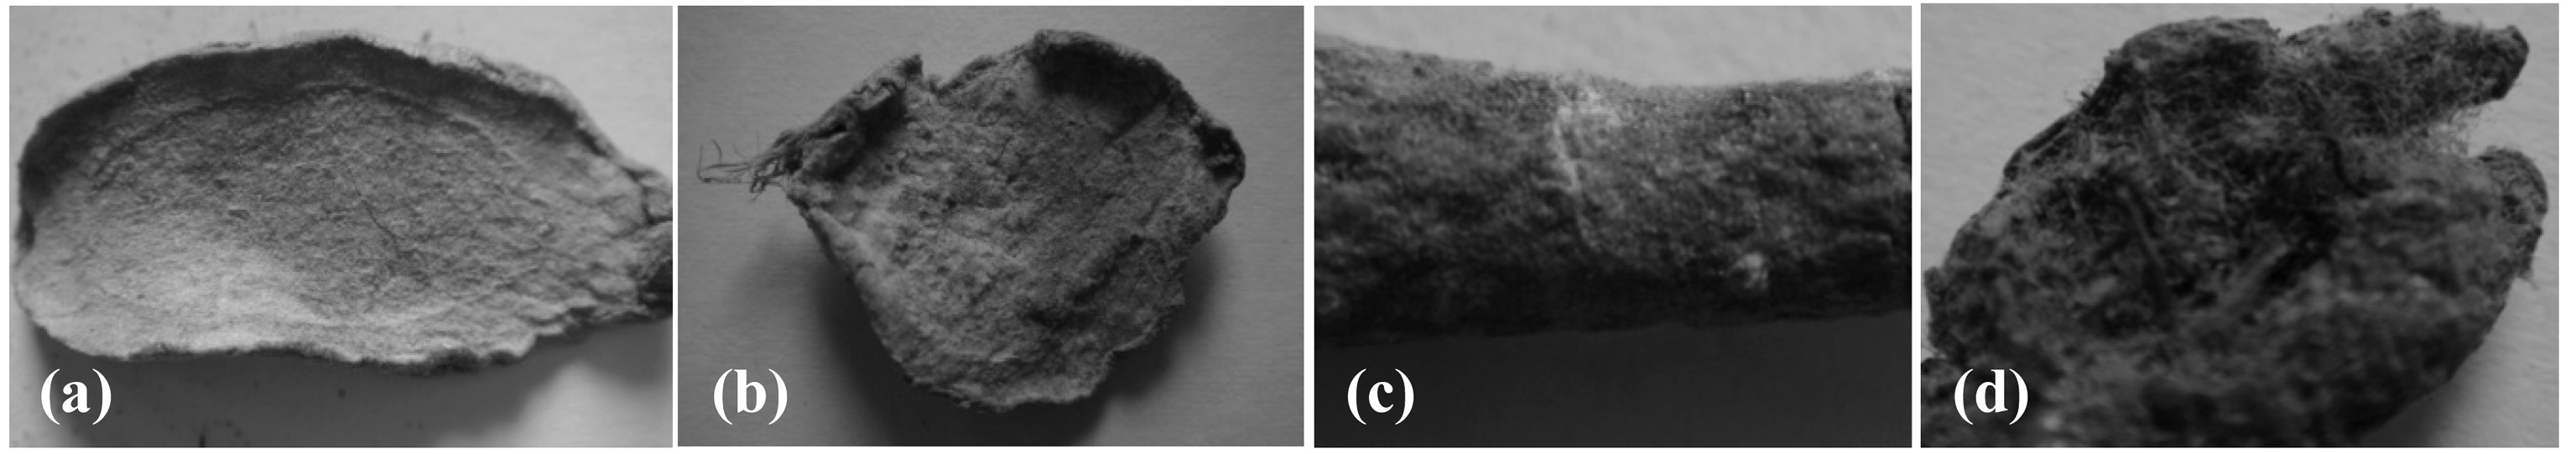 Surface shapes of Coptis and Curcuma root before and after fermentation with P. linteus at 32℃; before Coptis (a), after Coptis (b), before
Curcuma (c), after Curcuma (d).